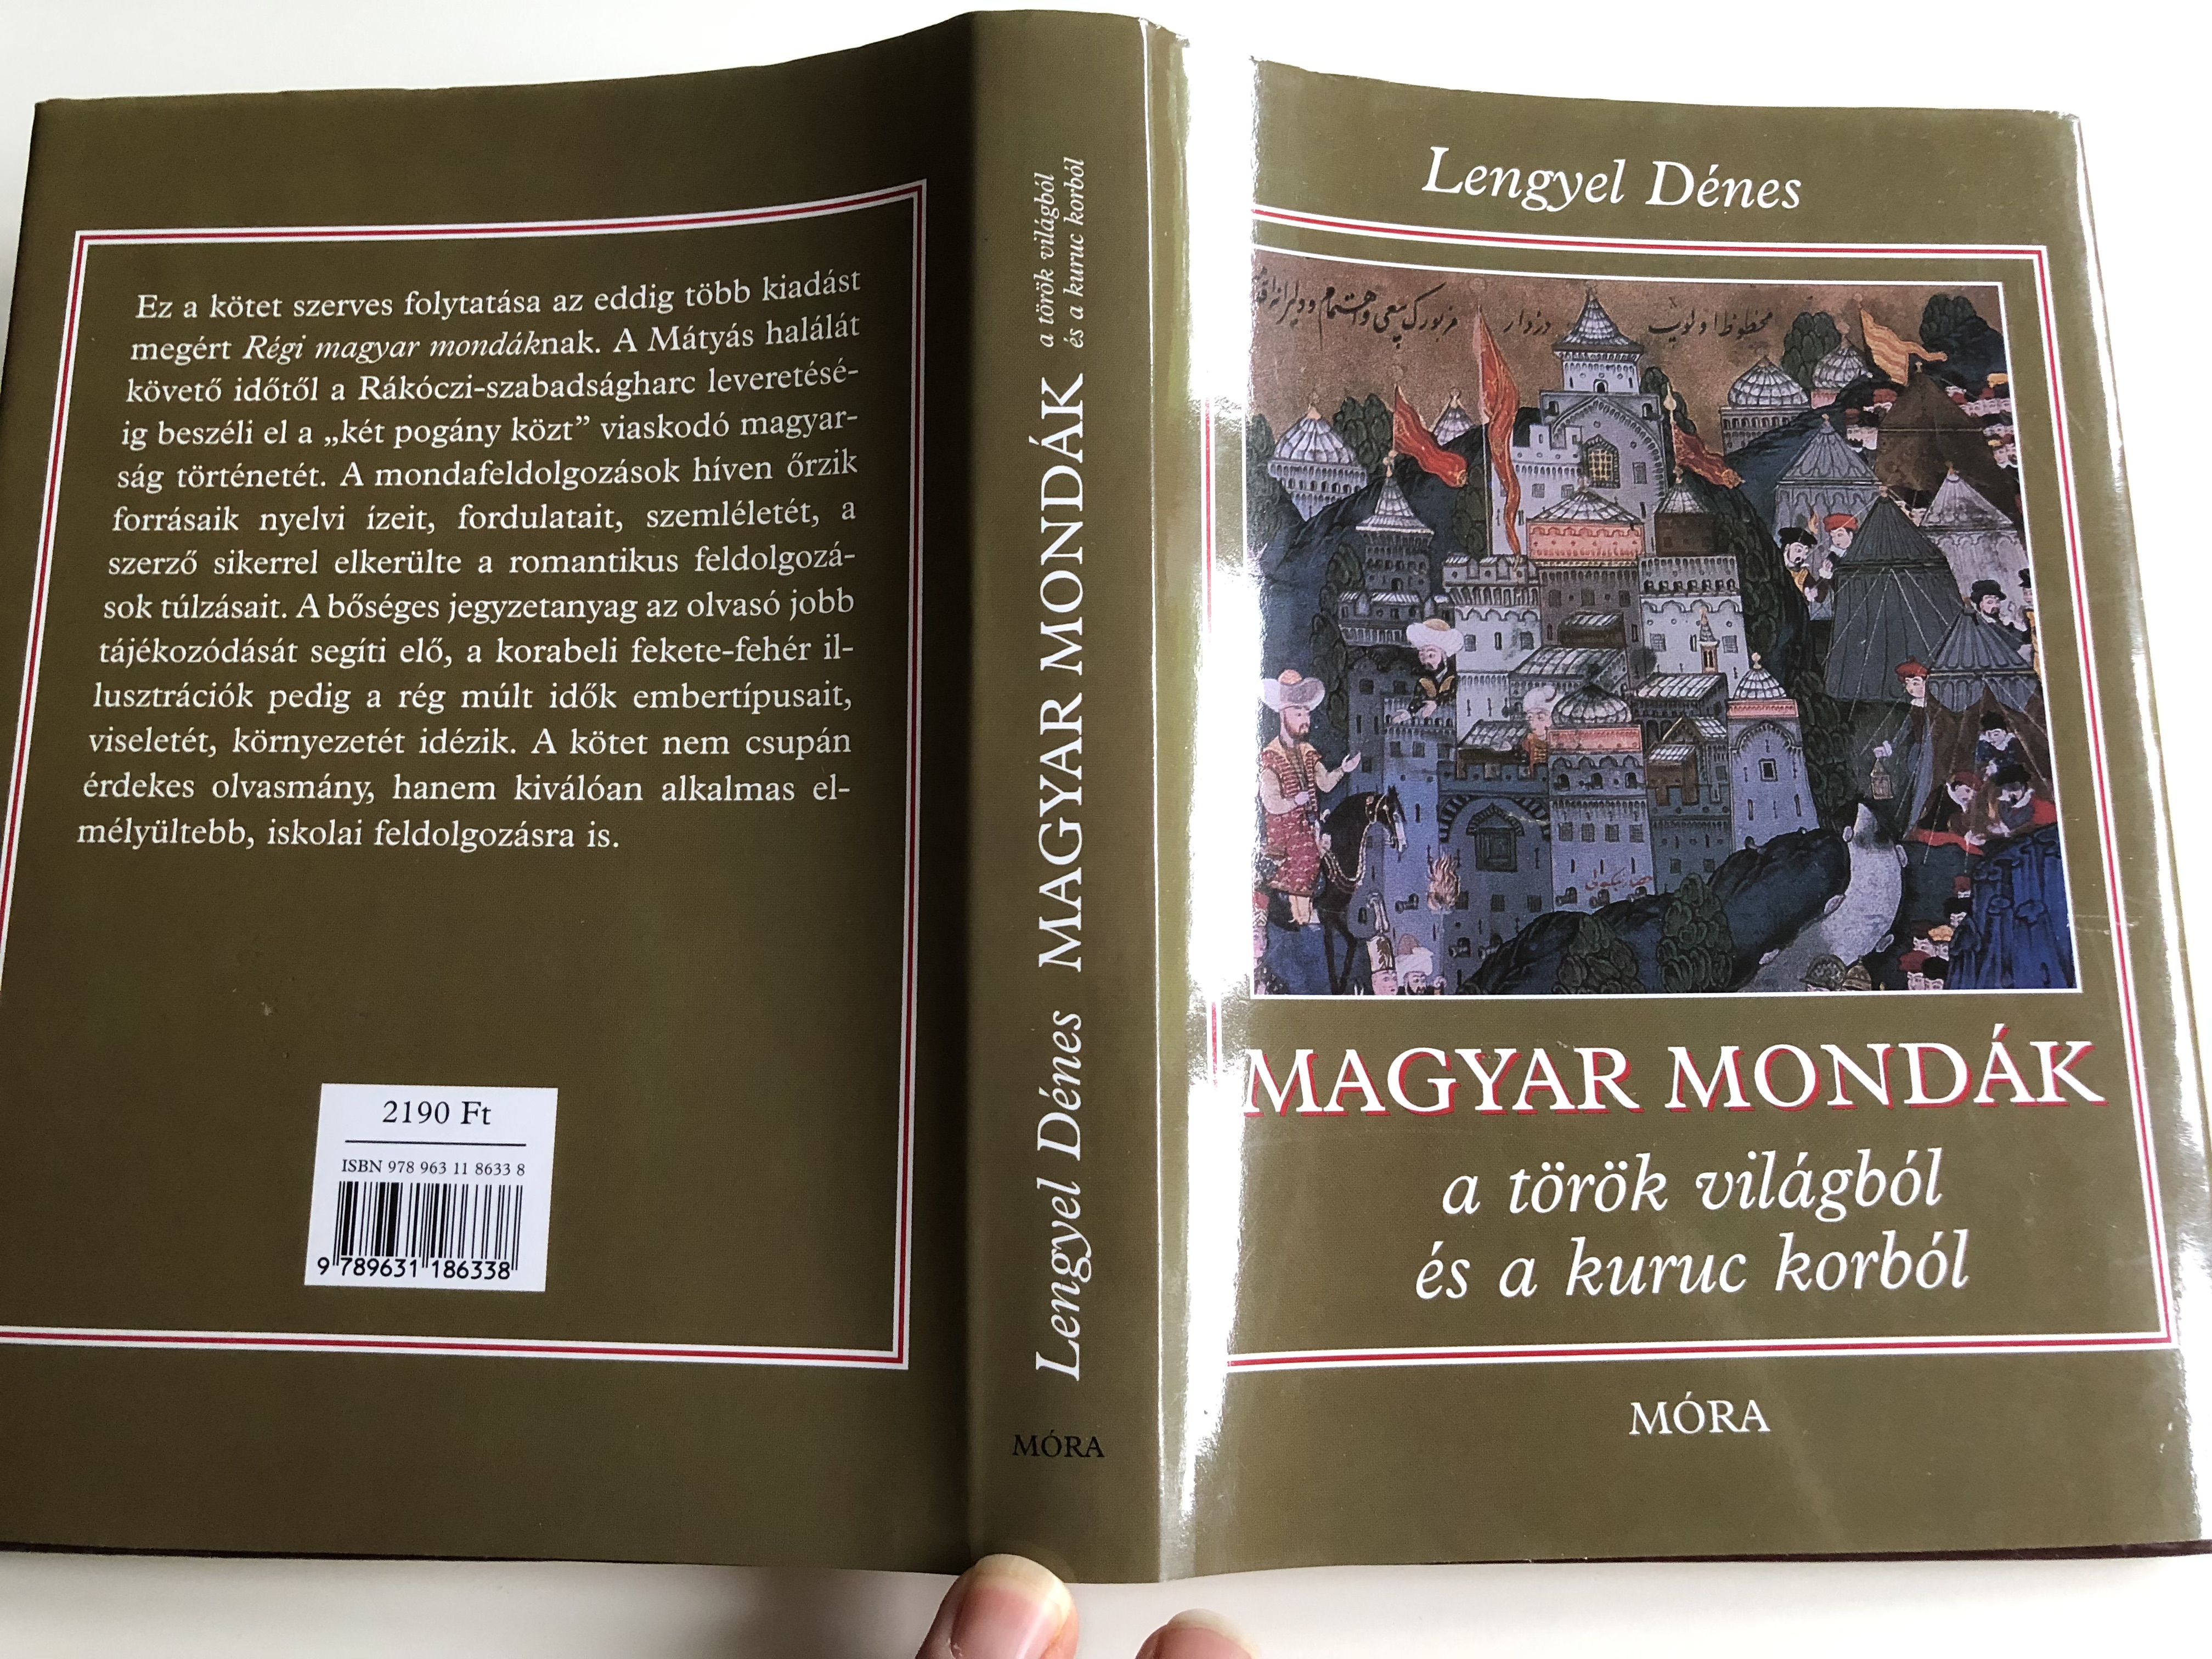 magyar-mond-k-a-t-r-k-vil-gb-l-s-a-kuruc-korb-l-by-lengyel-d-nes-hungarian-legends-and-sagas-from-the-medieval-turkish-rule-10th-edition-m-ra-2009-16-.jpg